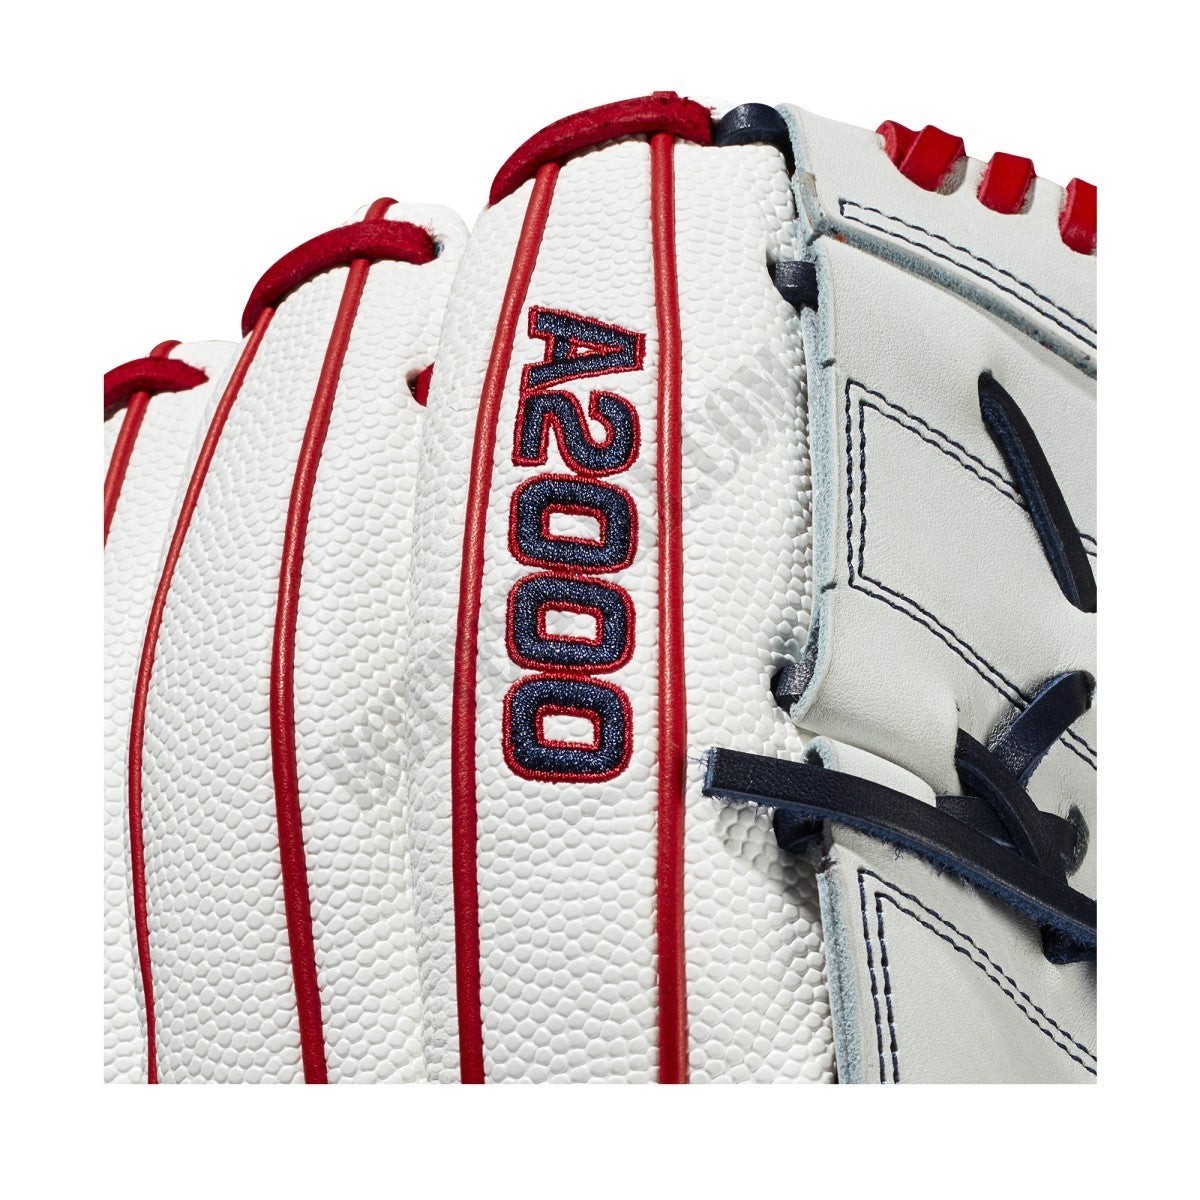 2021 A2000 MA14 GM 12.25" Pitcher's Fastpitch Glove ● Wilson Promotions - -6